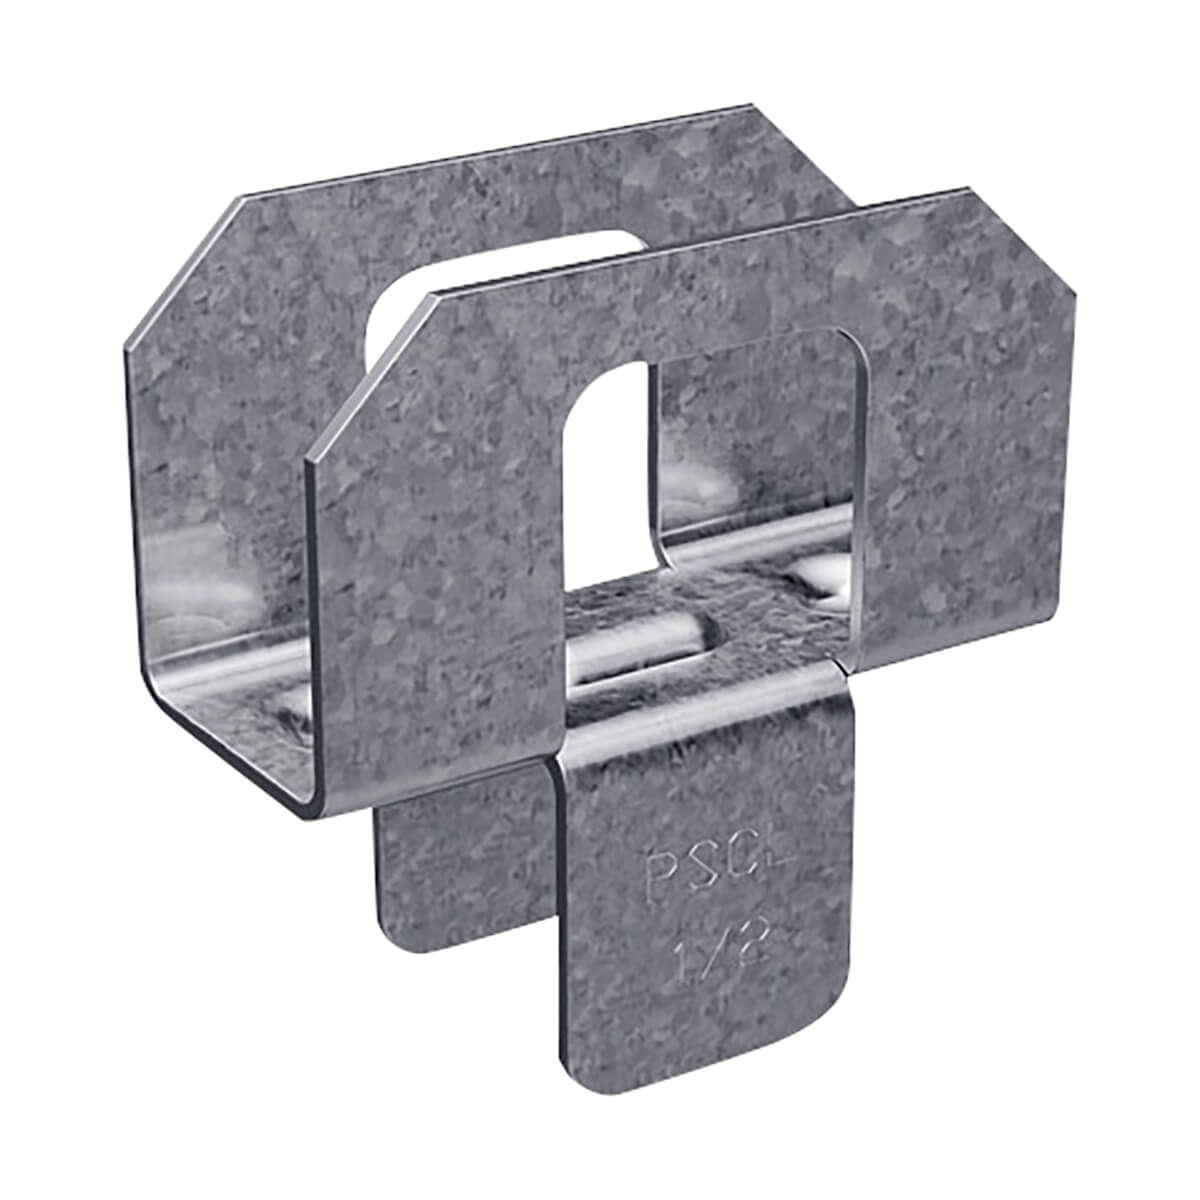 Simpson Strong-tie PSCL/PSCA Roof Sheathing Clip - 3/8-in - 50/ Pack PSCL 3/8-R50